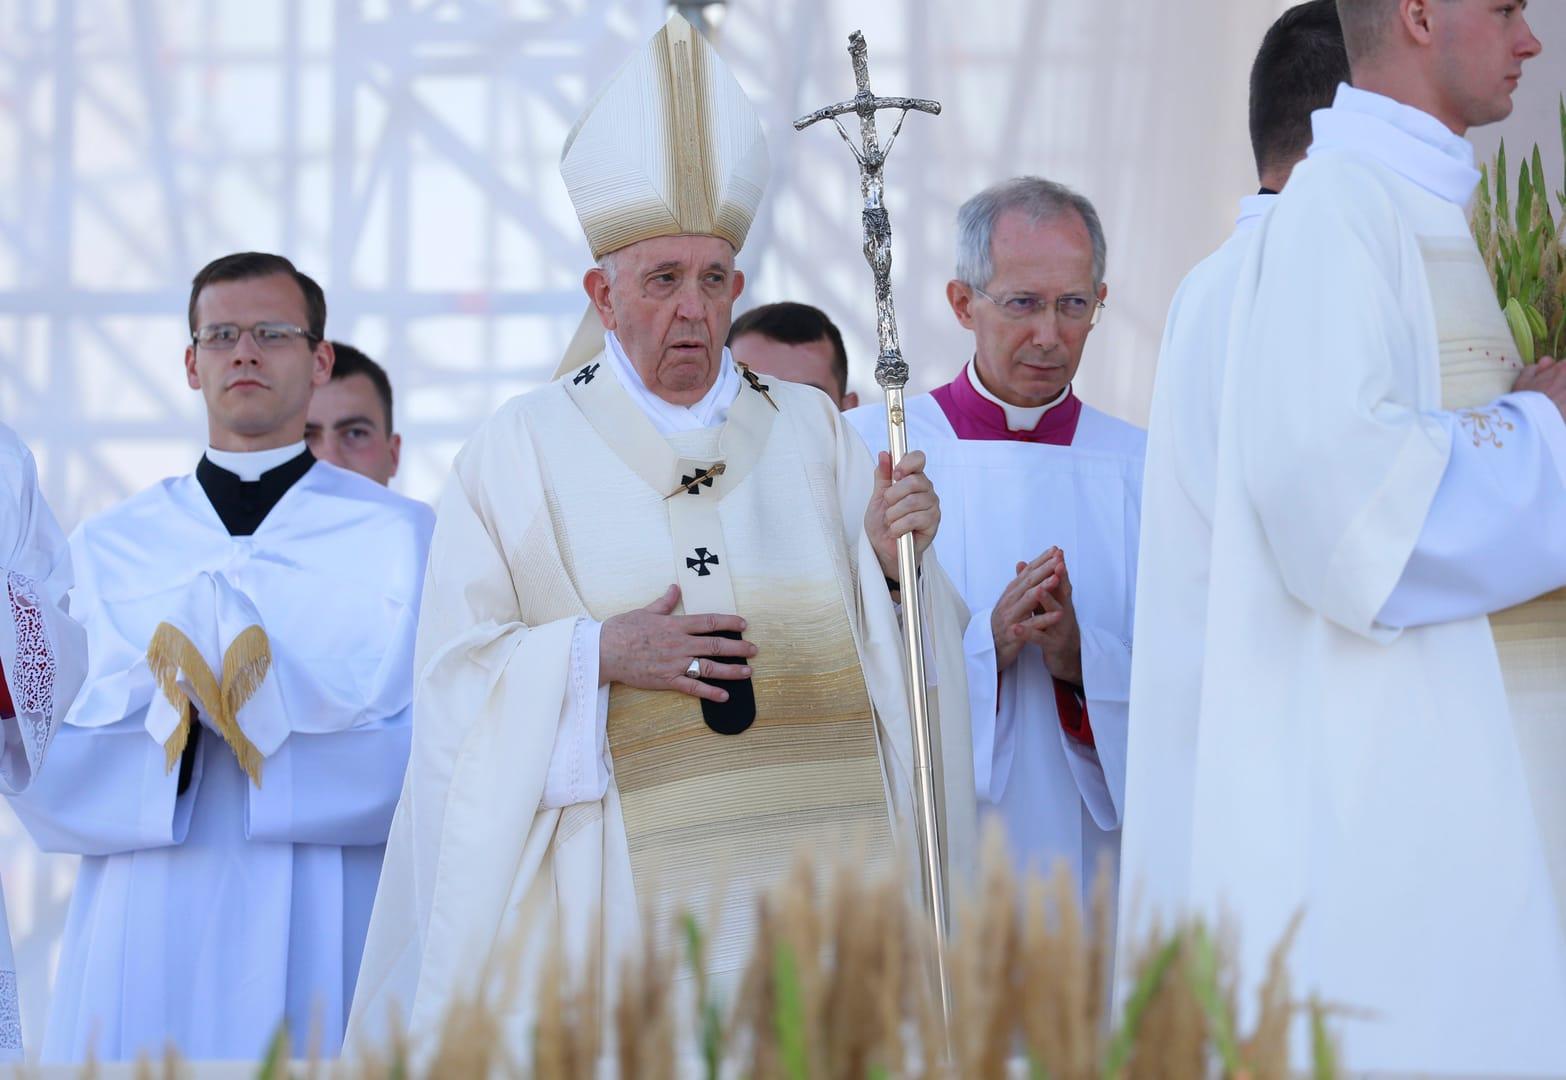 Pope Francis urges Slovakia to protect life from ‘culture of death’